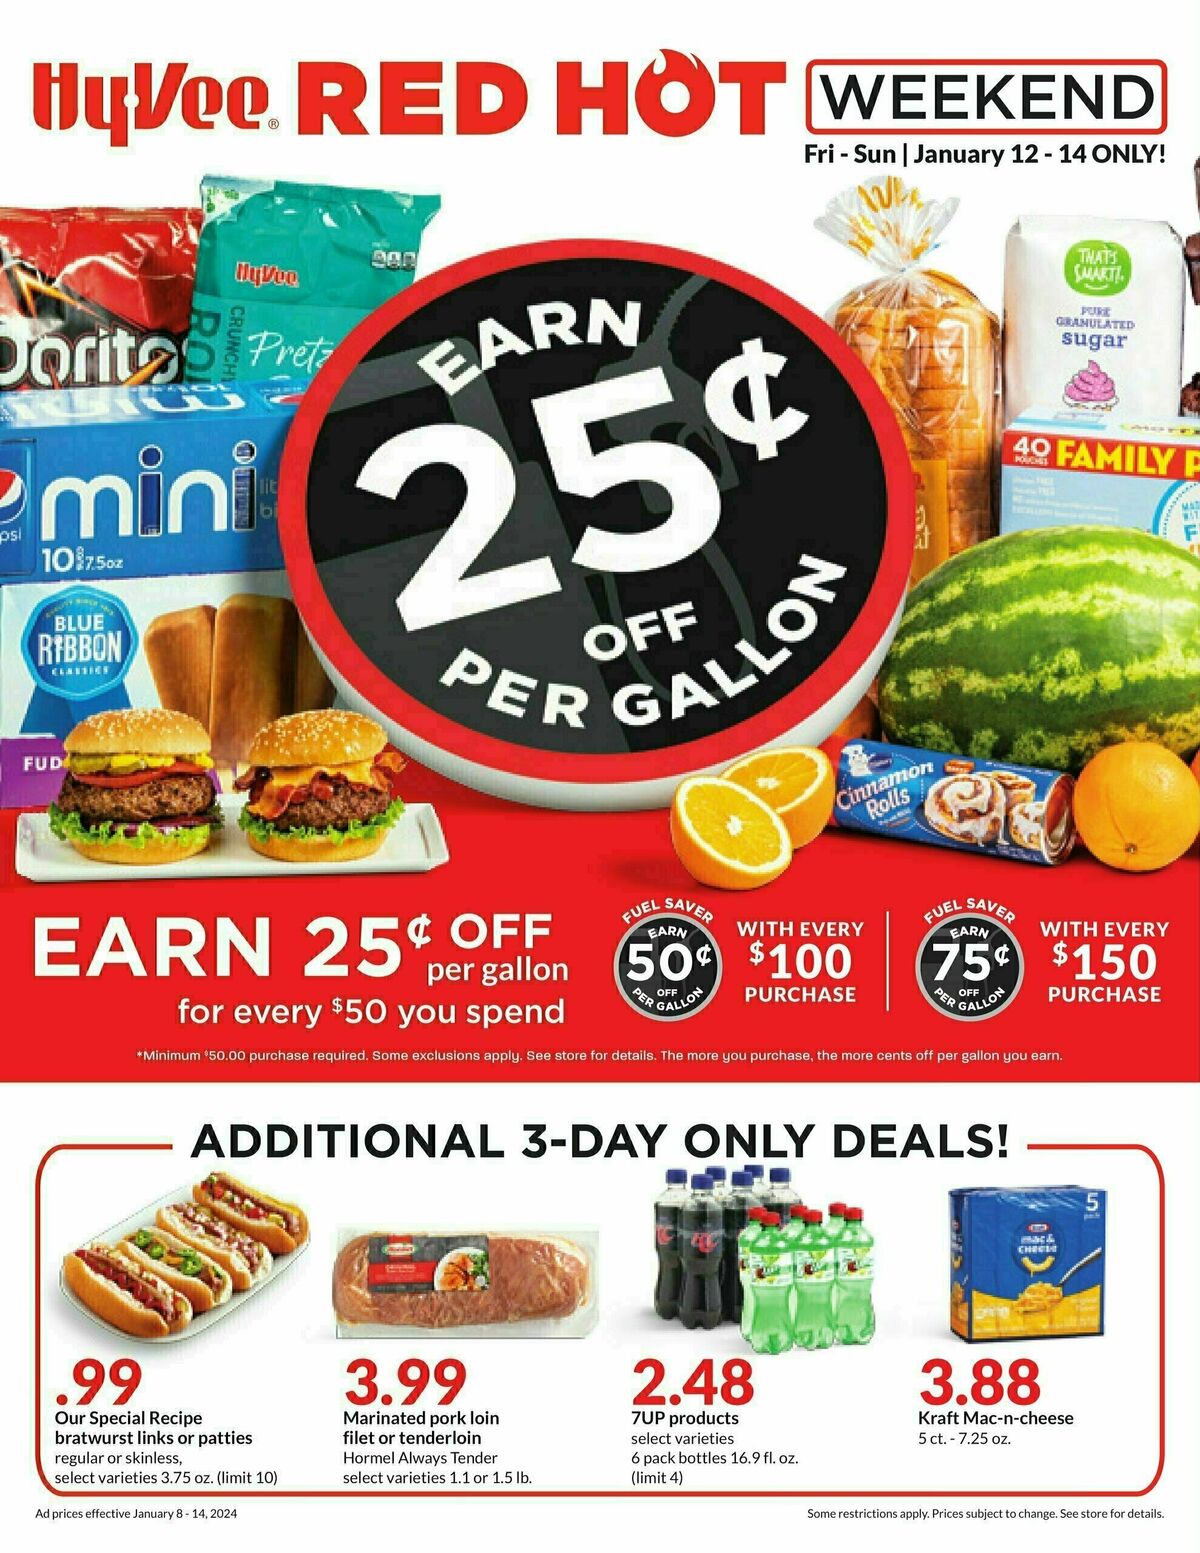 HyVee Red Hot Weekend Deals & Ads from January 12